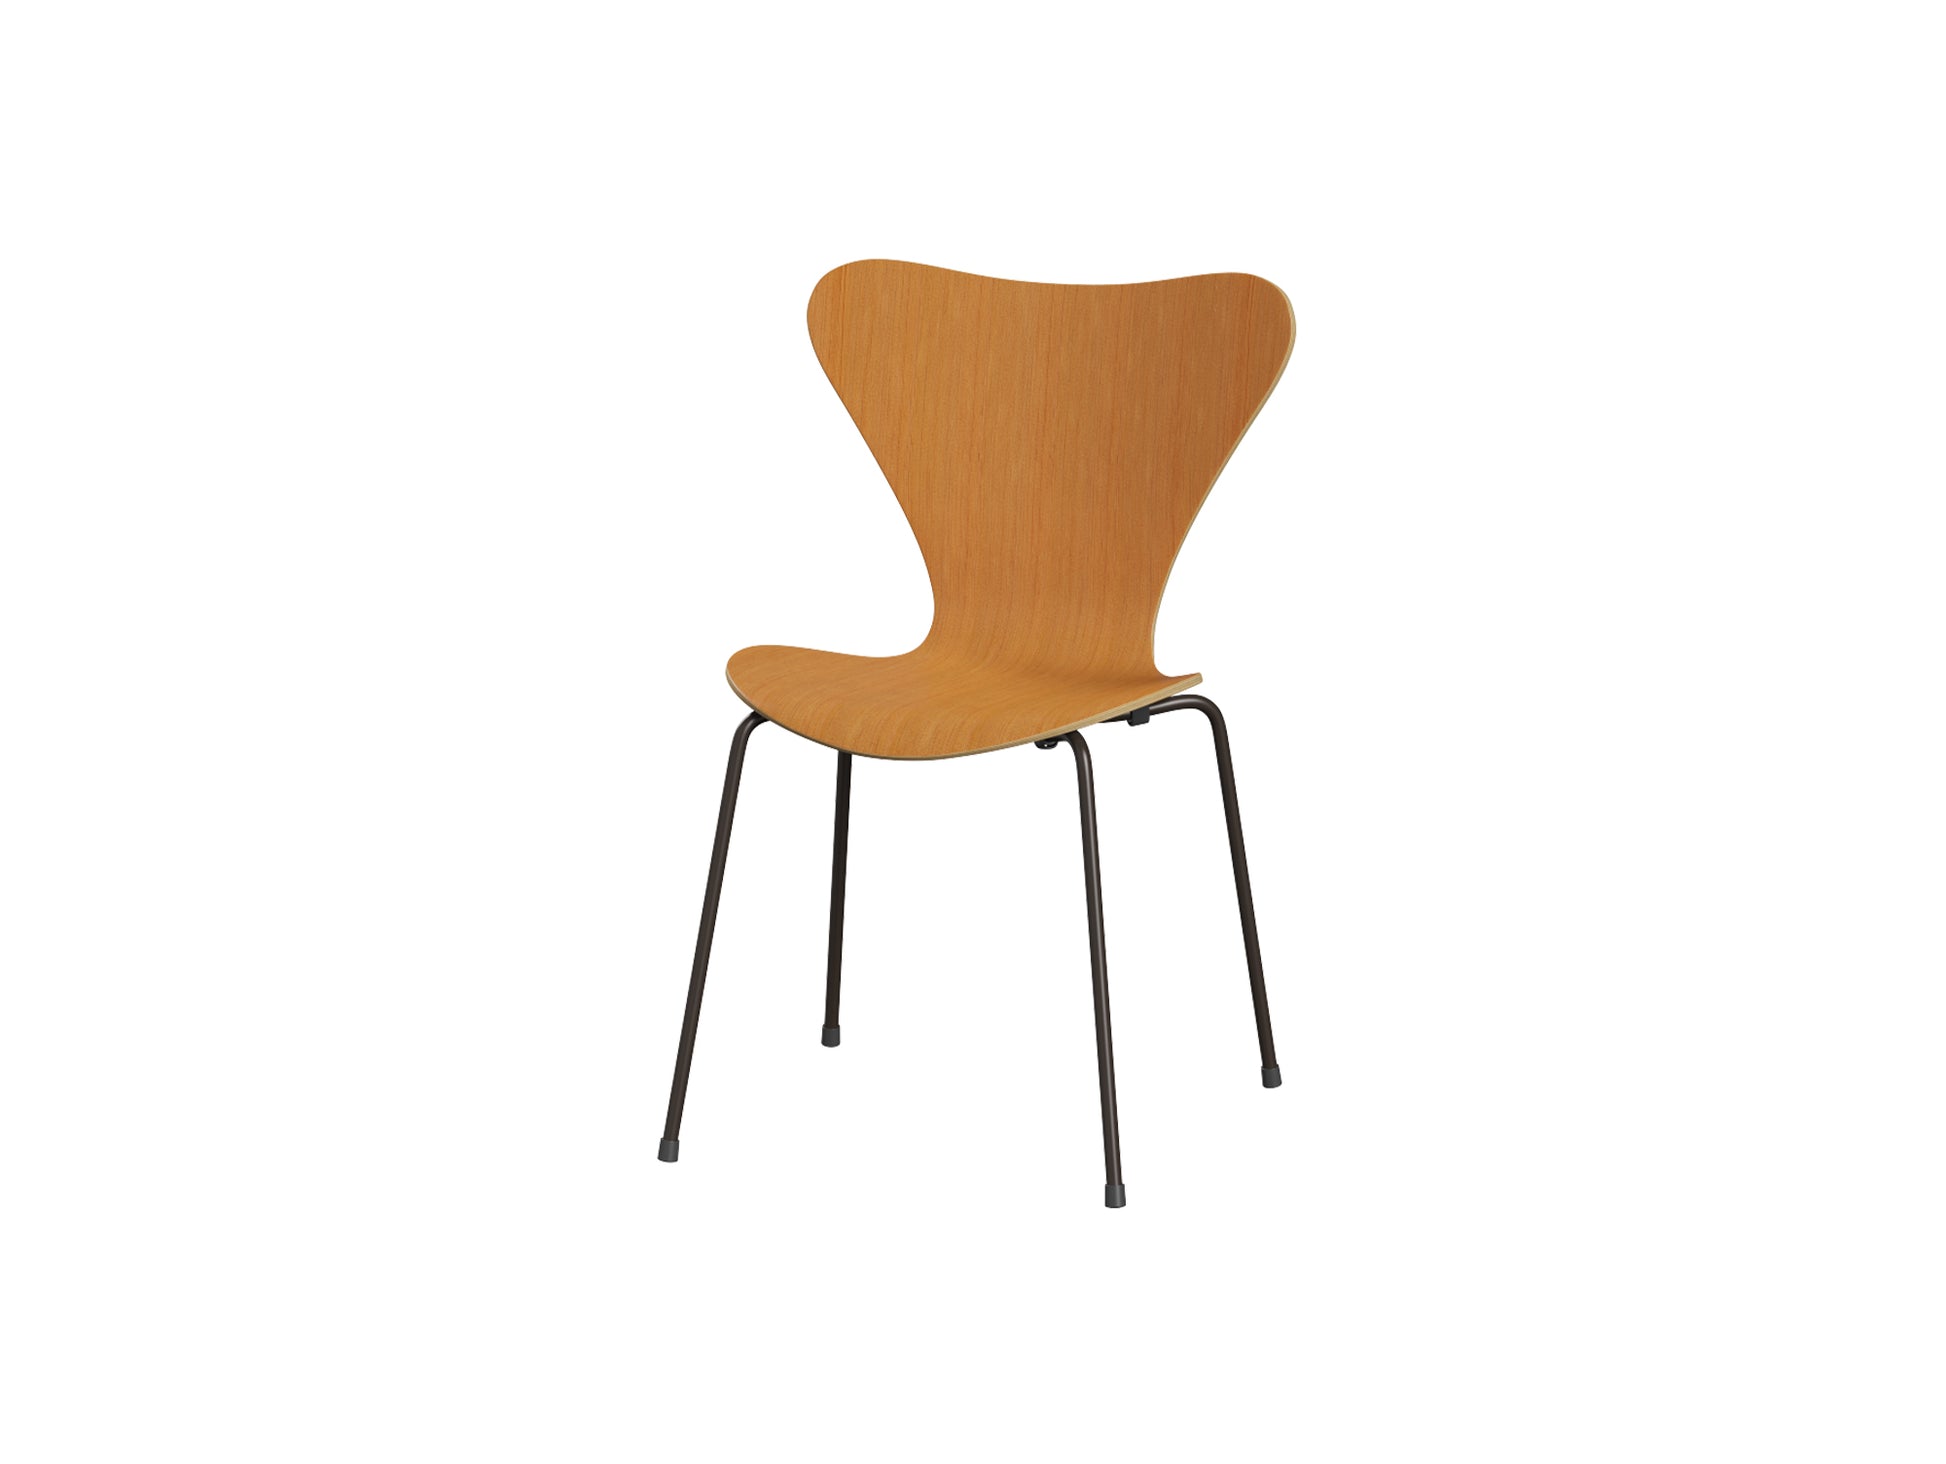 Series 7 Dining Chair (Clear Lacquered Wood) by Fritz Hanse - Oregon Pine / Brown Bronze Steel